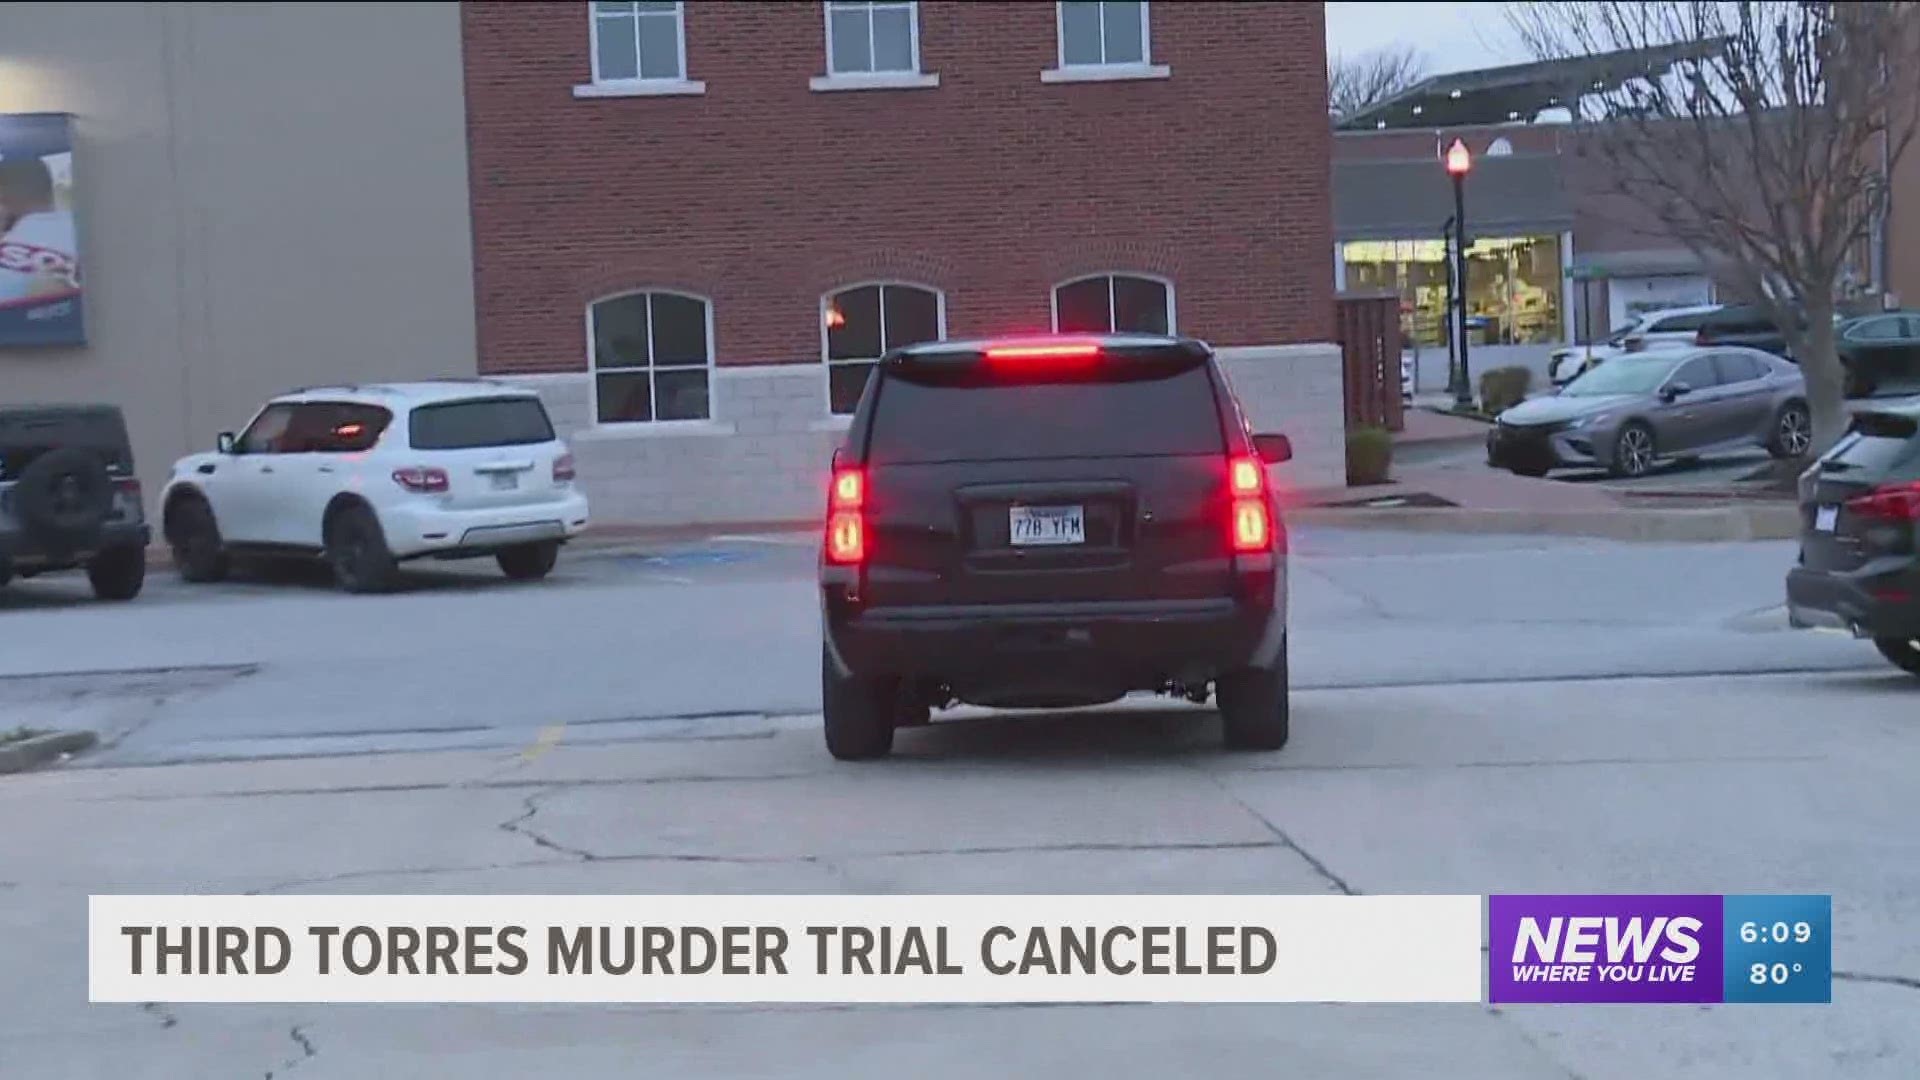 Third Torres murder trial canceled due to COVID-19